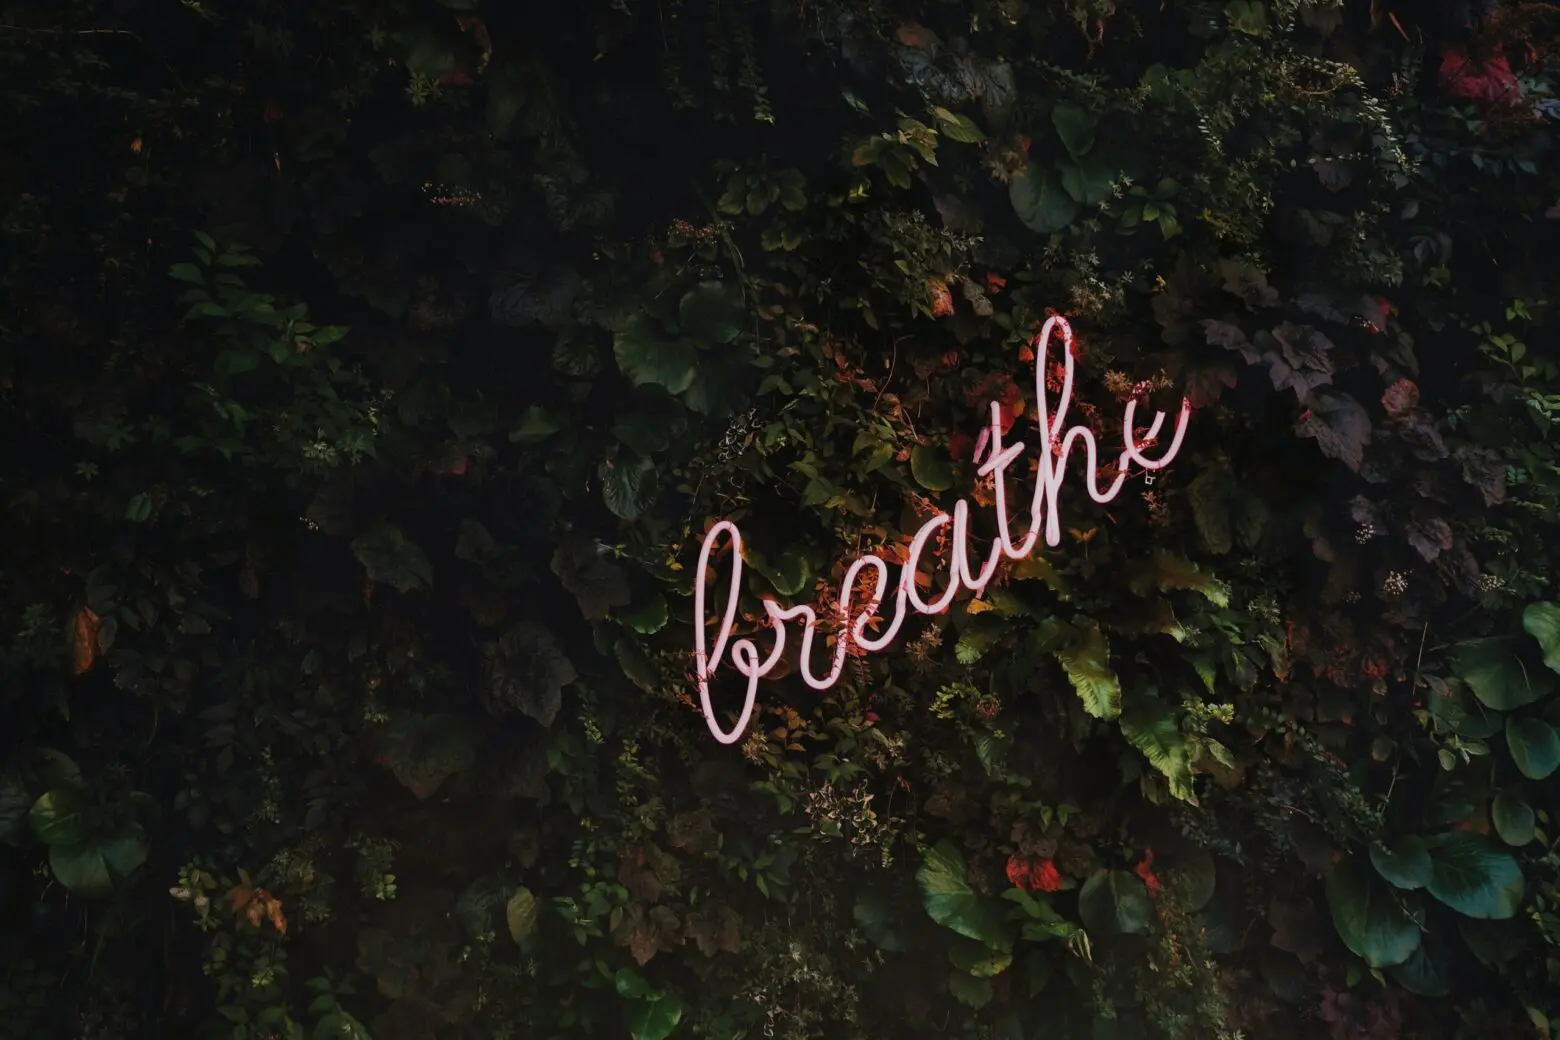 'Breathe' sing. We have to always remind ourselves to be patient and kind with others. We never know what they've been through.